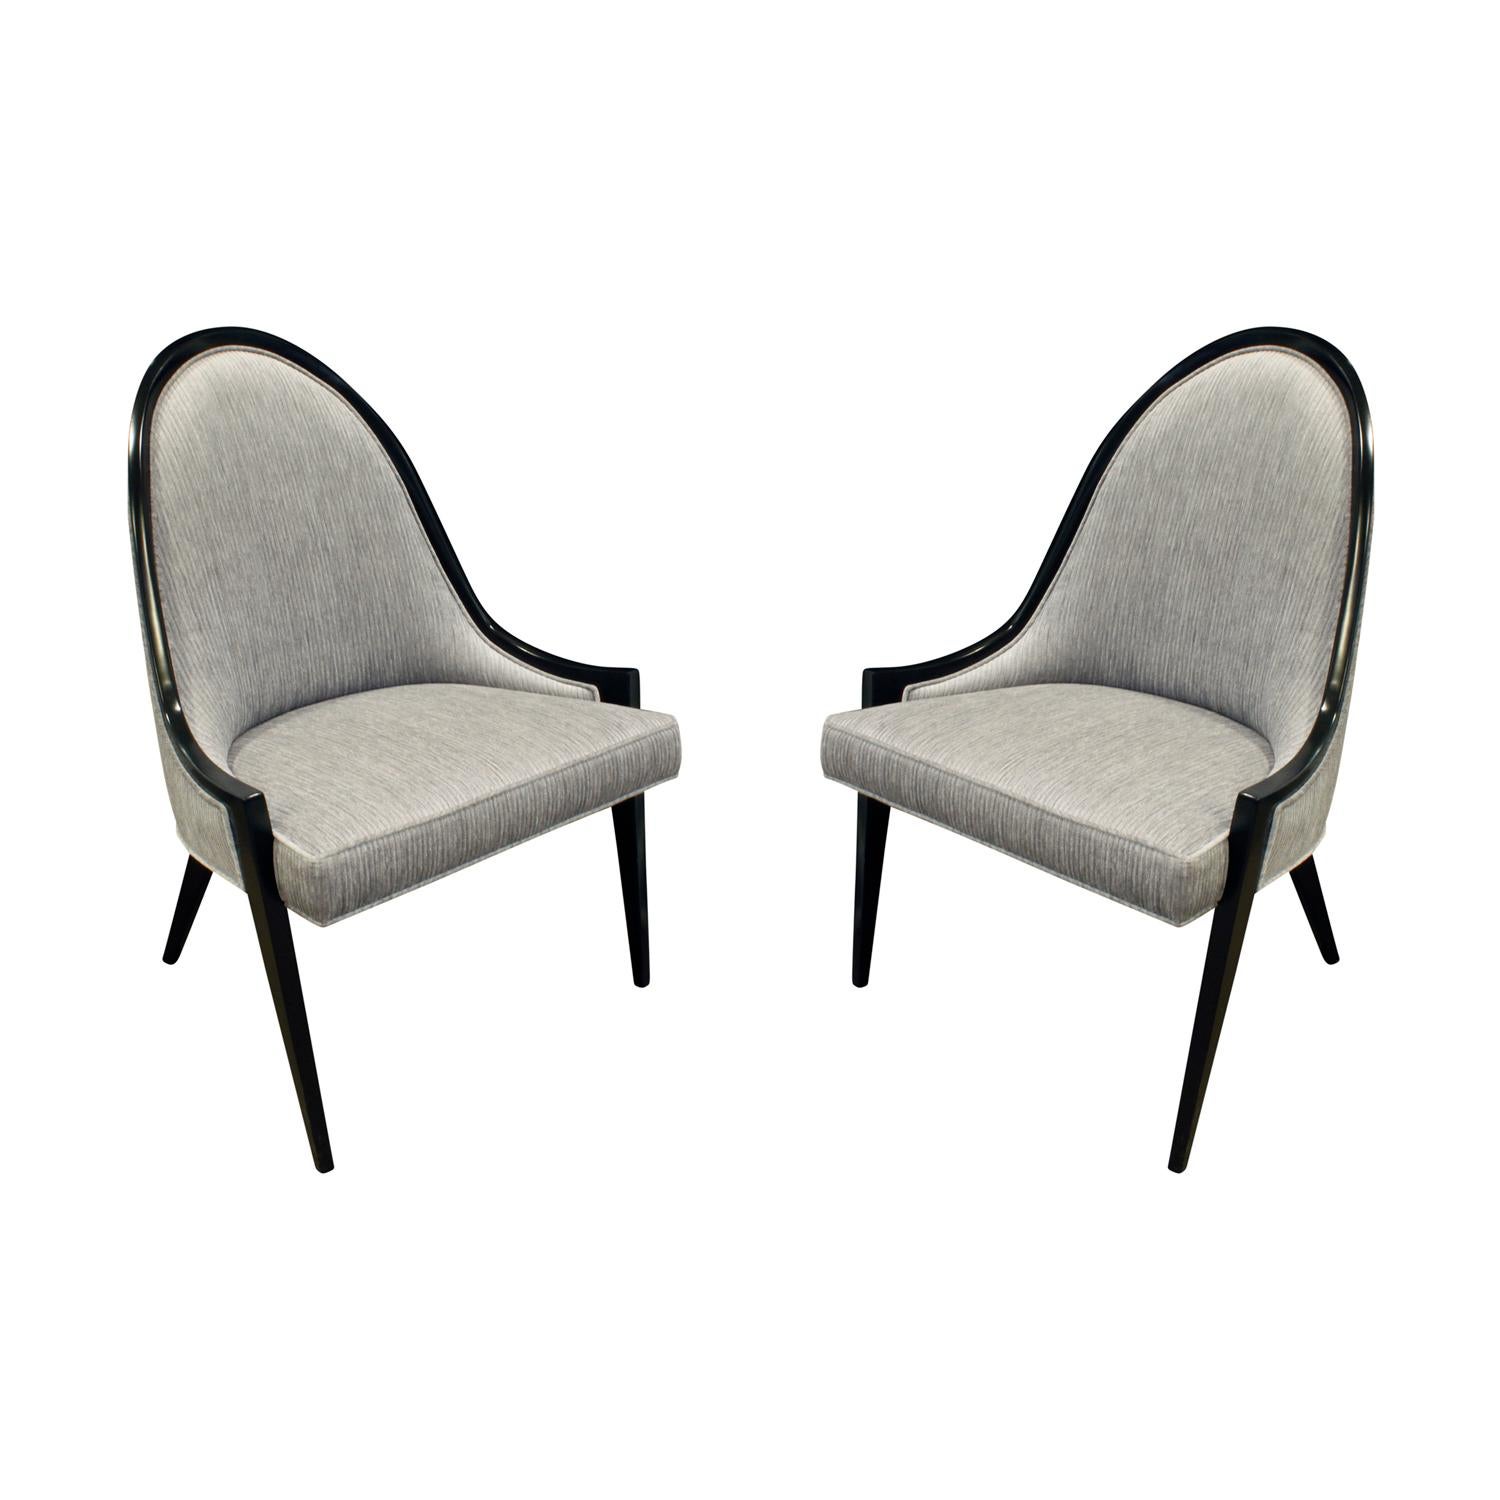 Harvey Probber Sculptural Pair of Chairs, 1950s